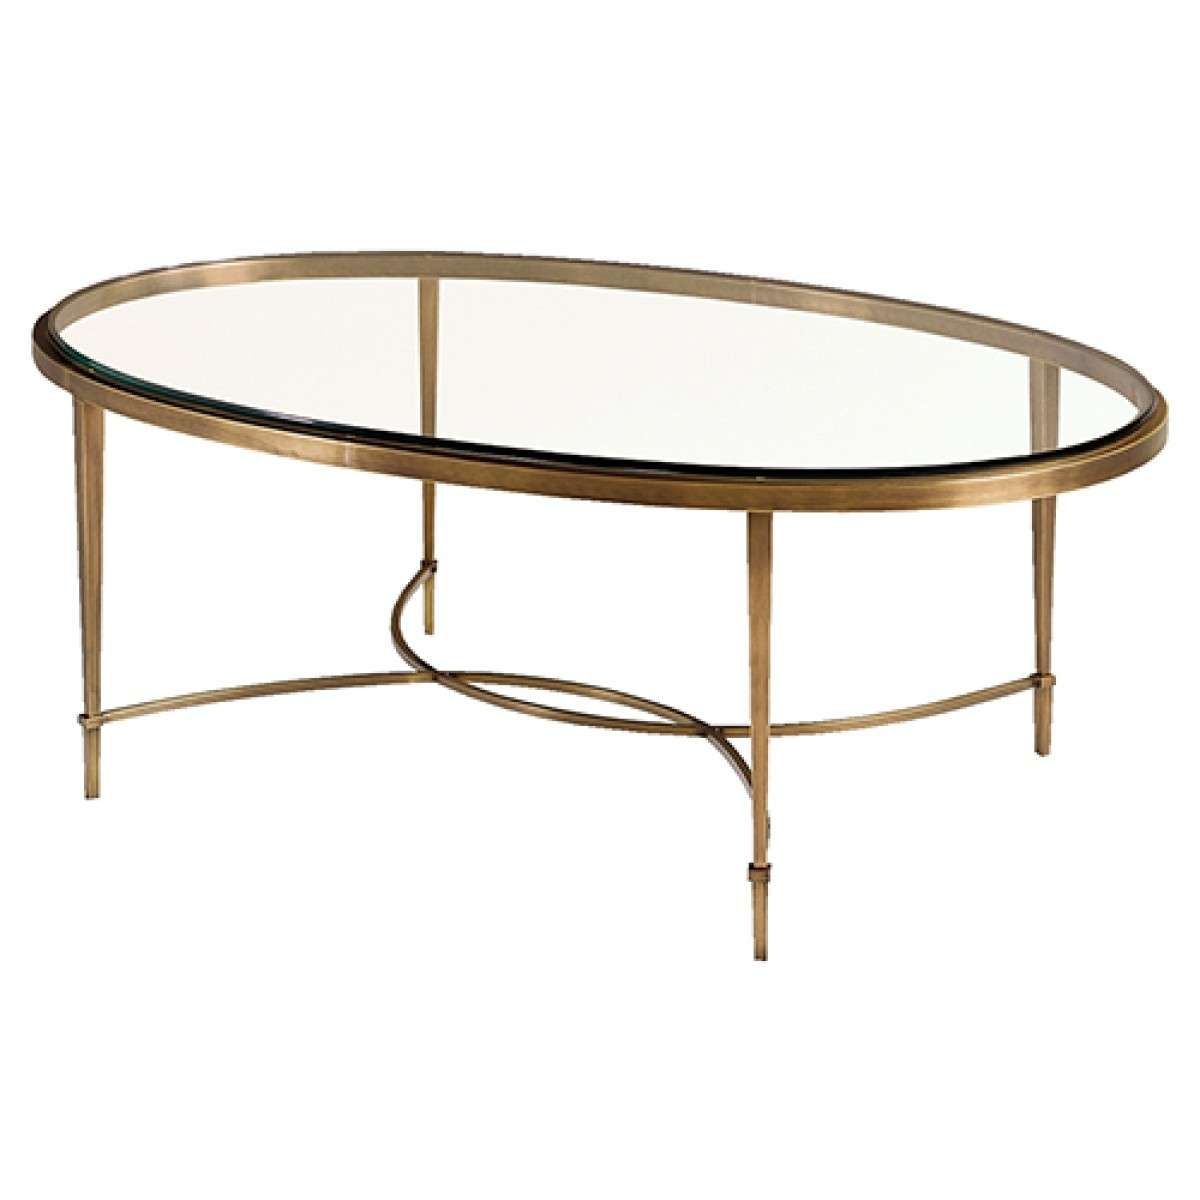 Well Known Antique Glass Coffee Tables Within Coffee Tables : Mesmerizing Antique And Minimalist Oval Coffee (Gallery 17 of 20)